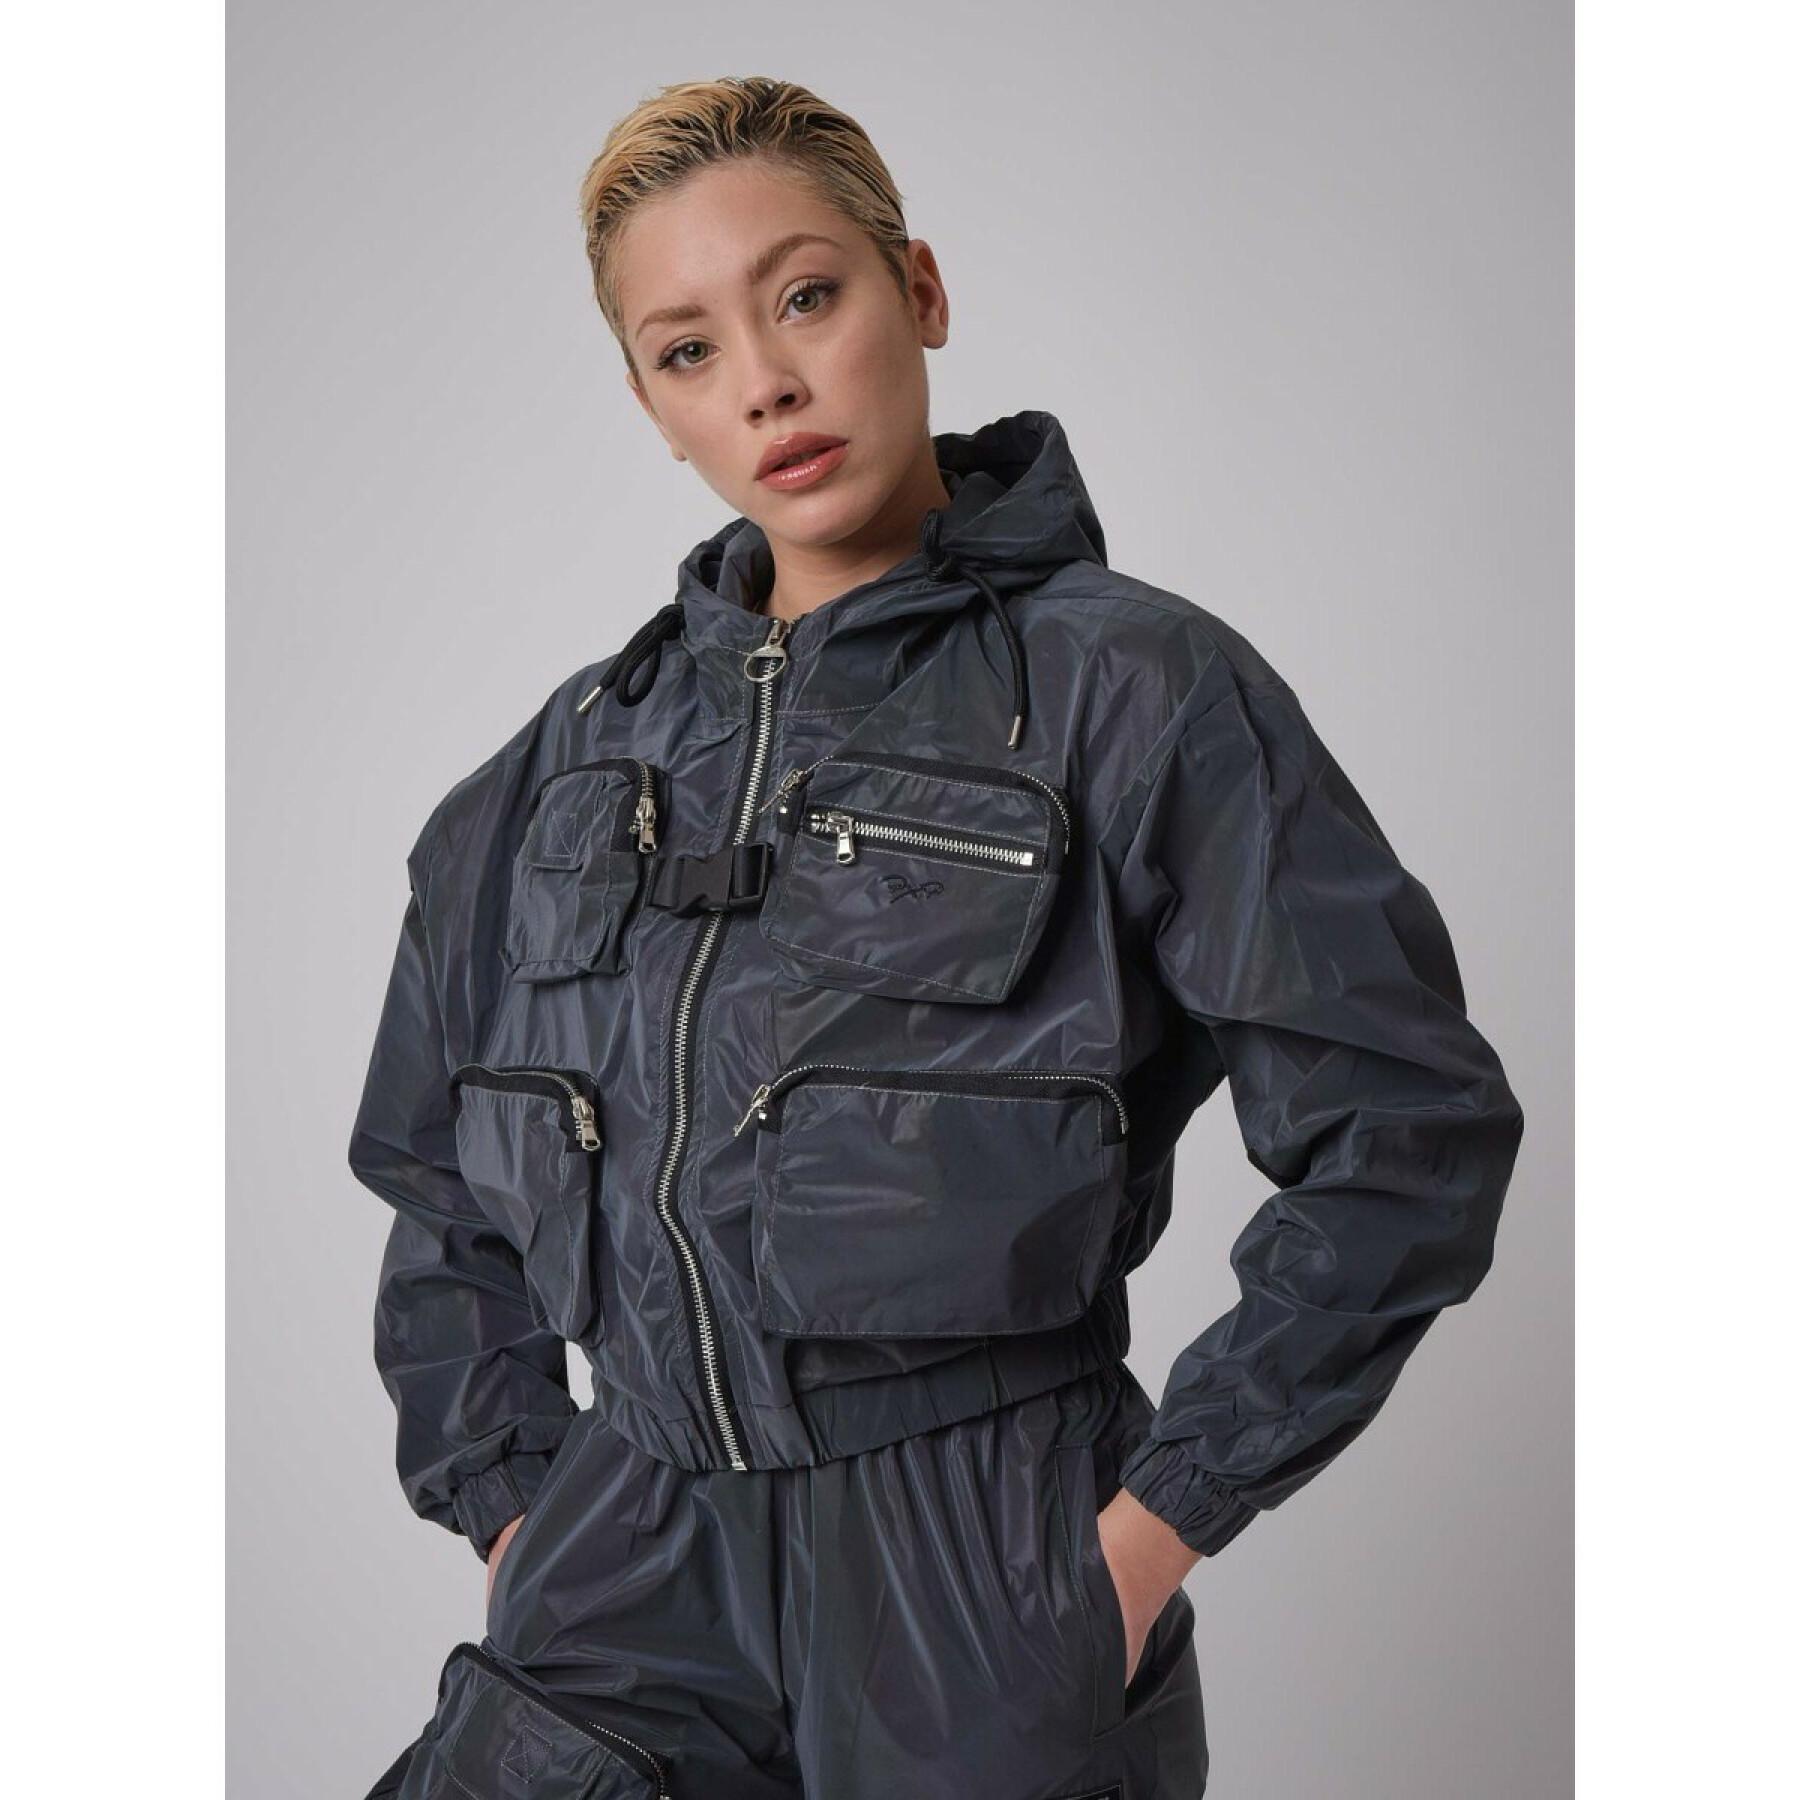 Women's reflect hooded jacket with relief pockets Project X Paris